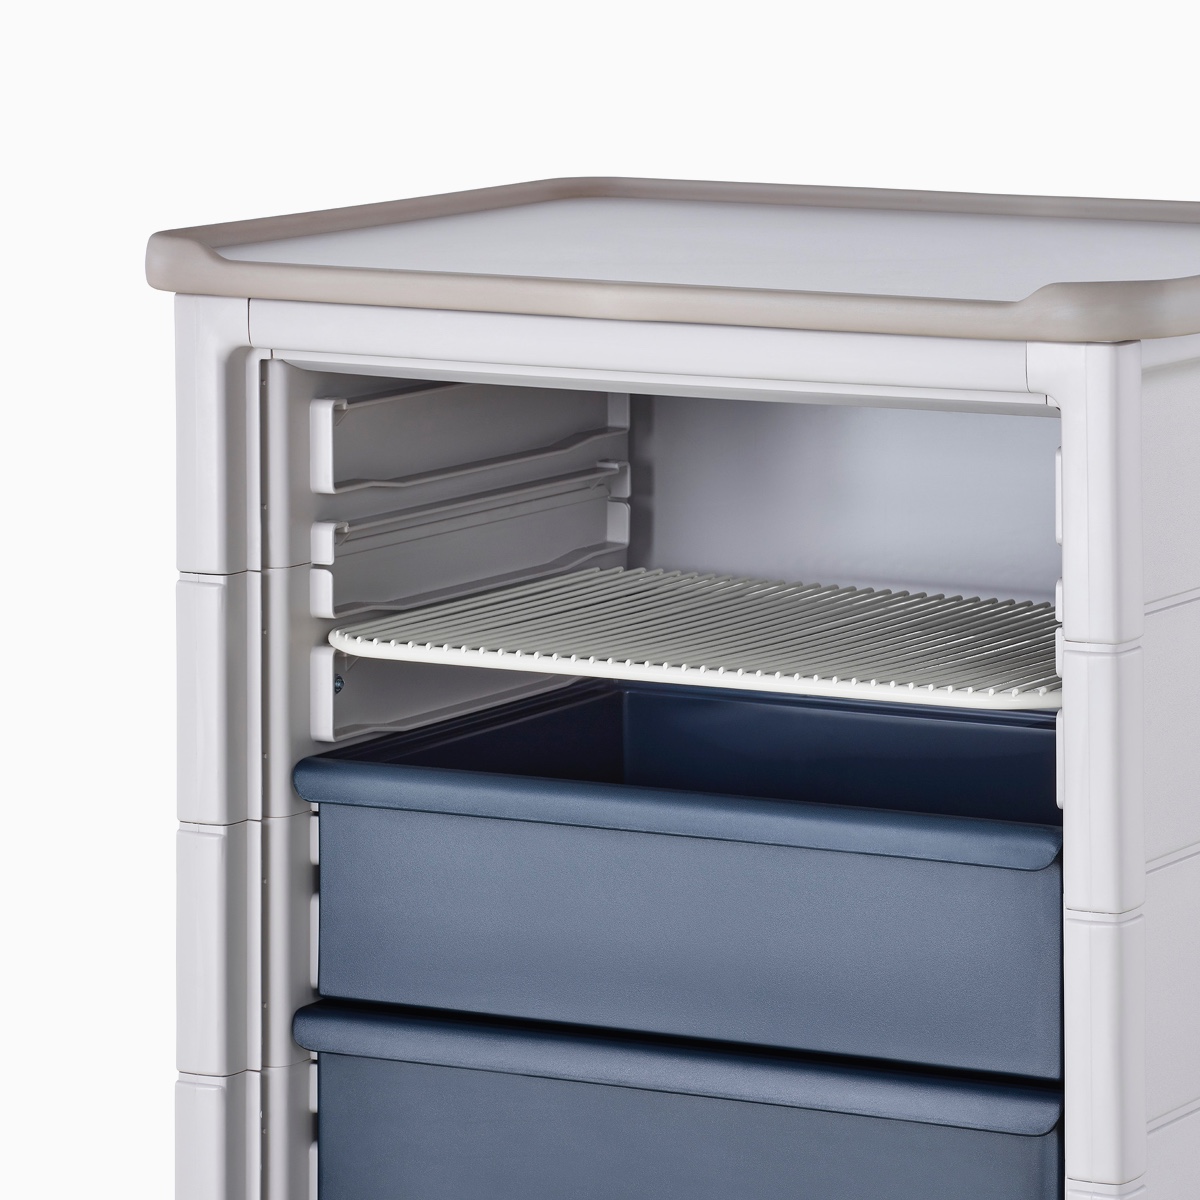 Detail of Procedure and Supply Cart in a light gray body and dark blue modular drawers with a soft white modular wire shelf.